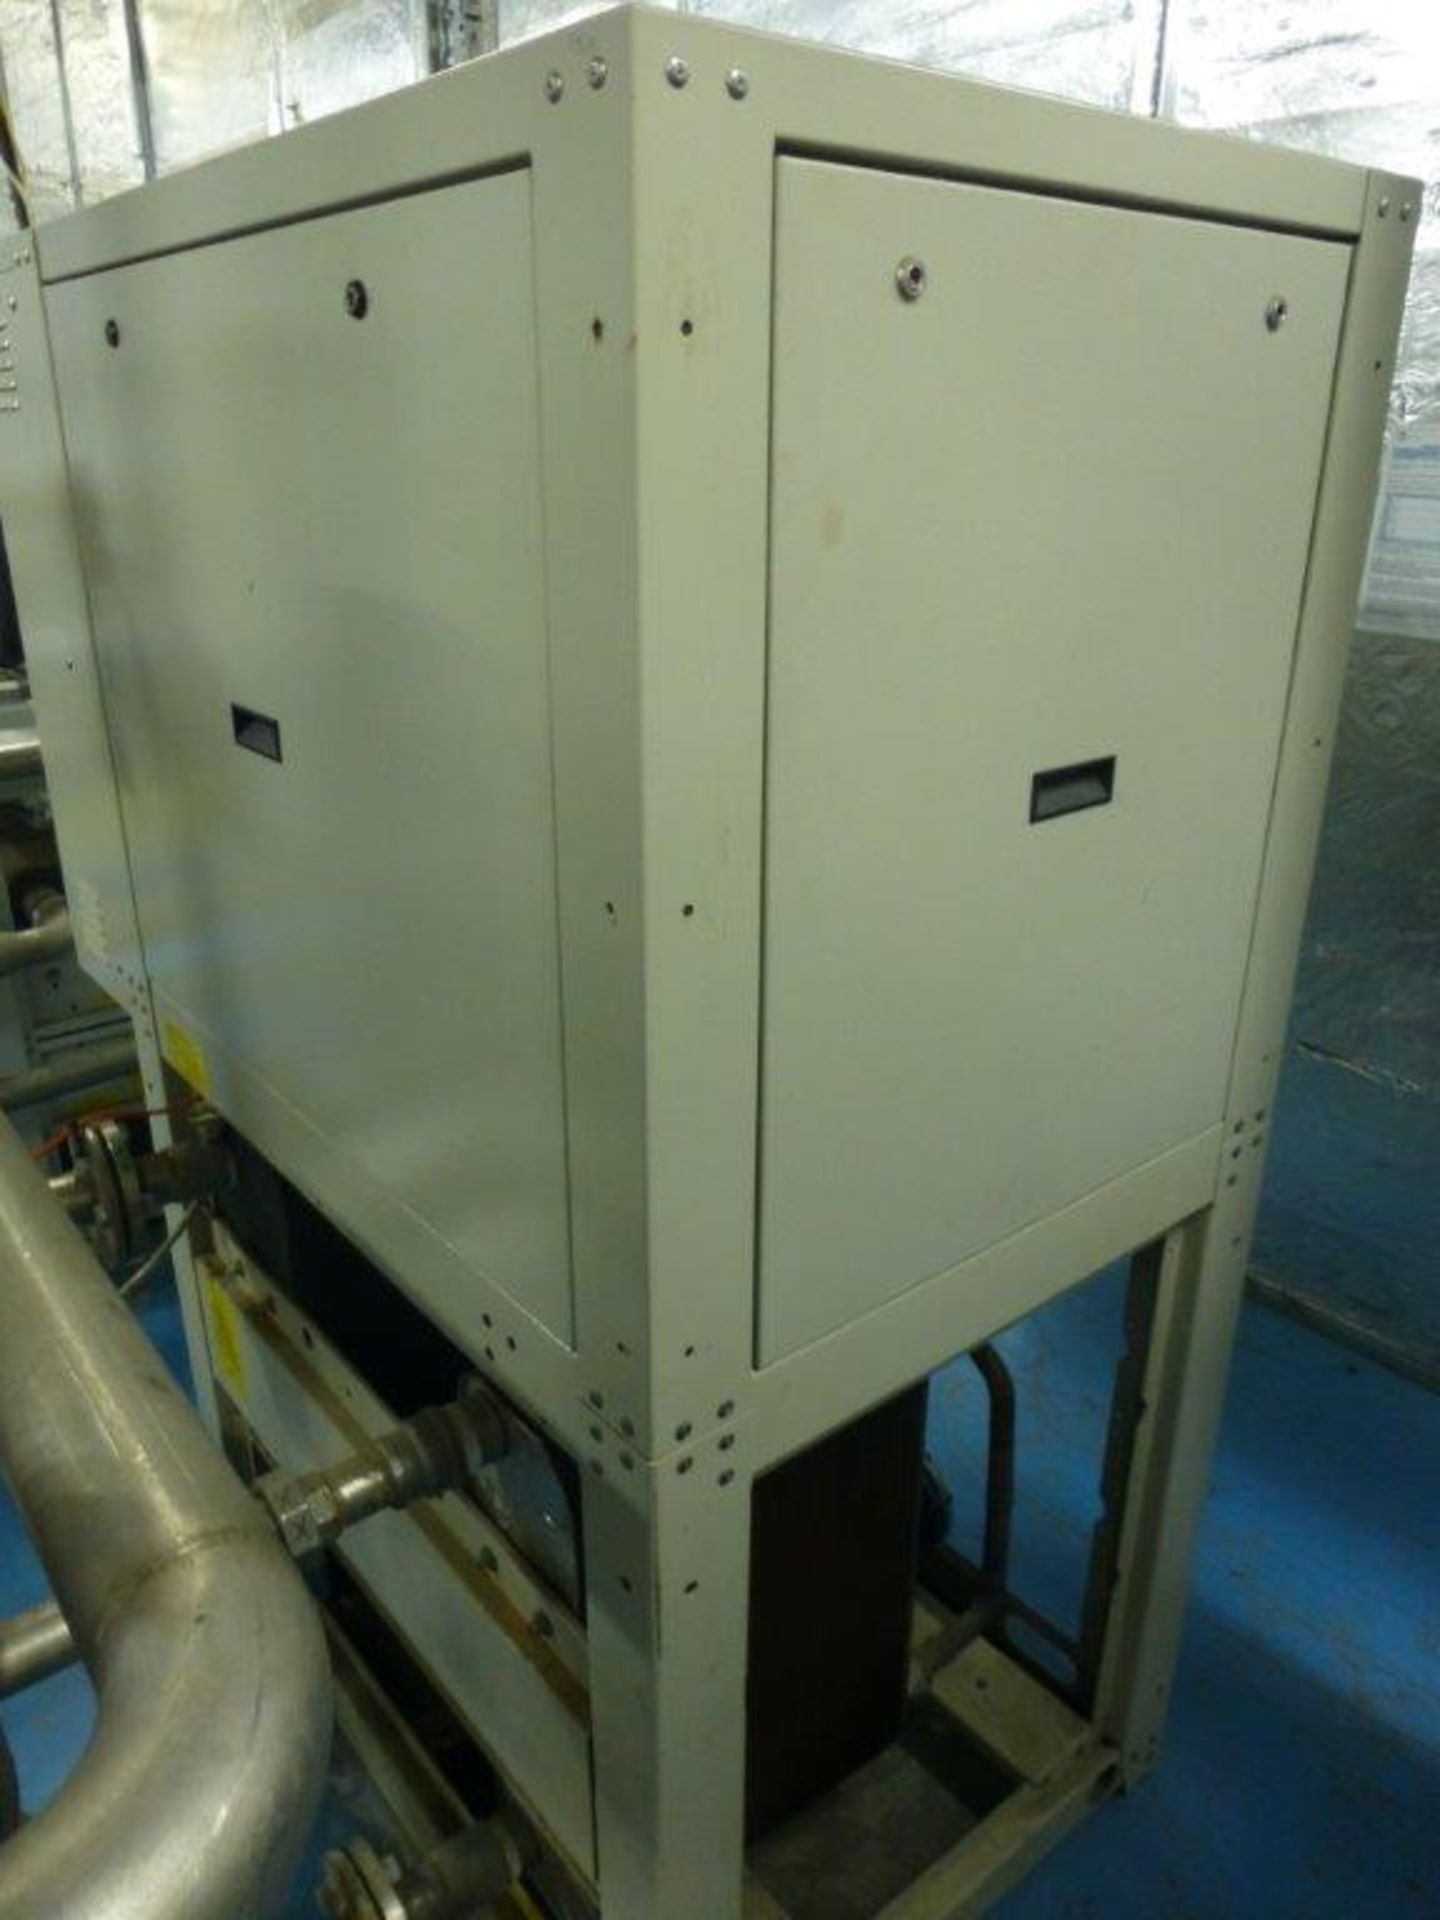 BlueBox Sigma 2002 13.2 water chiller, serial No BBOX075070, Chiller No 2, (Disconnection at first - Image 2 of 4